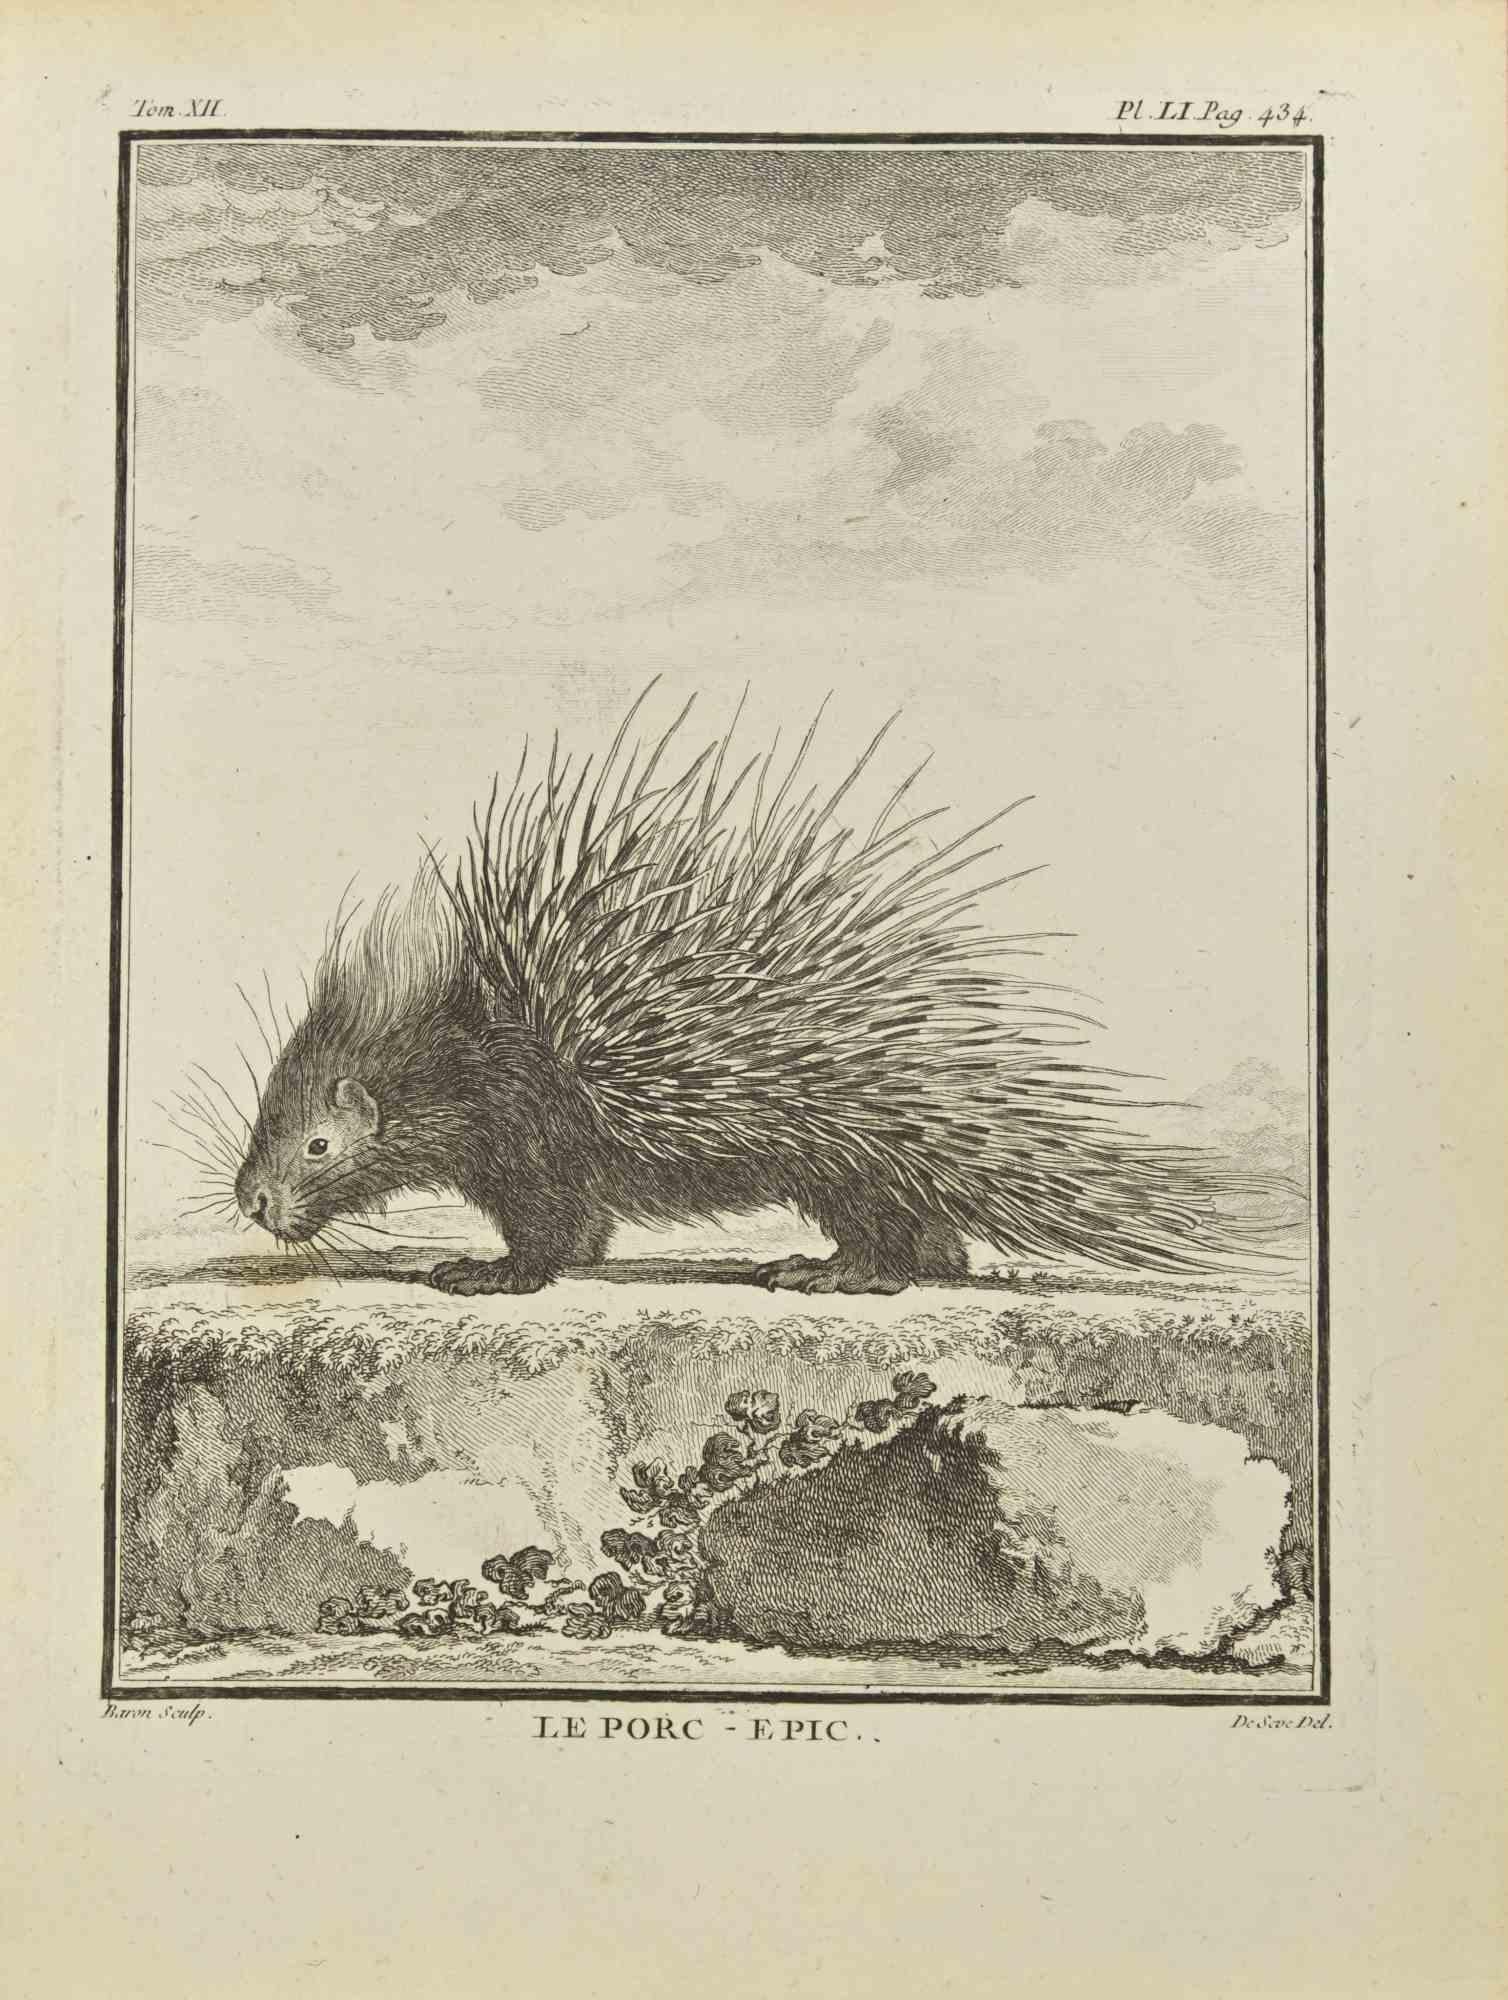 Le Porc is an etching realized by Jacques Baron in 1771.

It belongs to the suite "Histoire Naturelle de Buffon".

The Artist's signature is engraved lower right.

Good conditions with slight foxing.